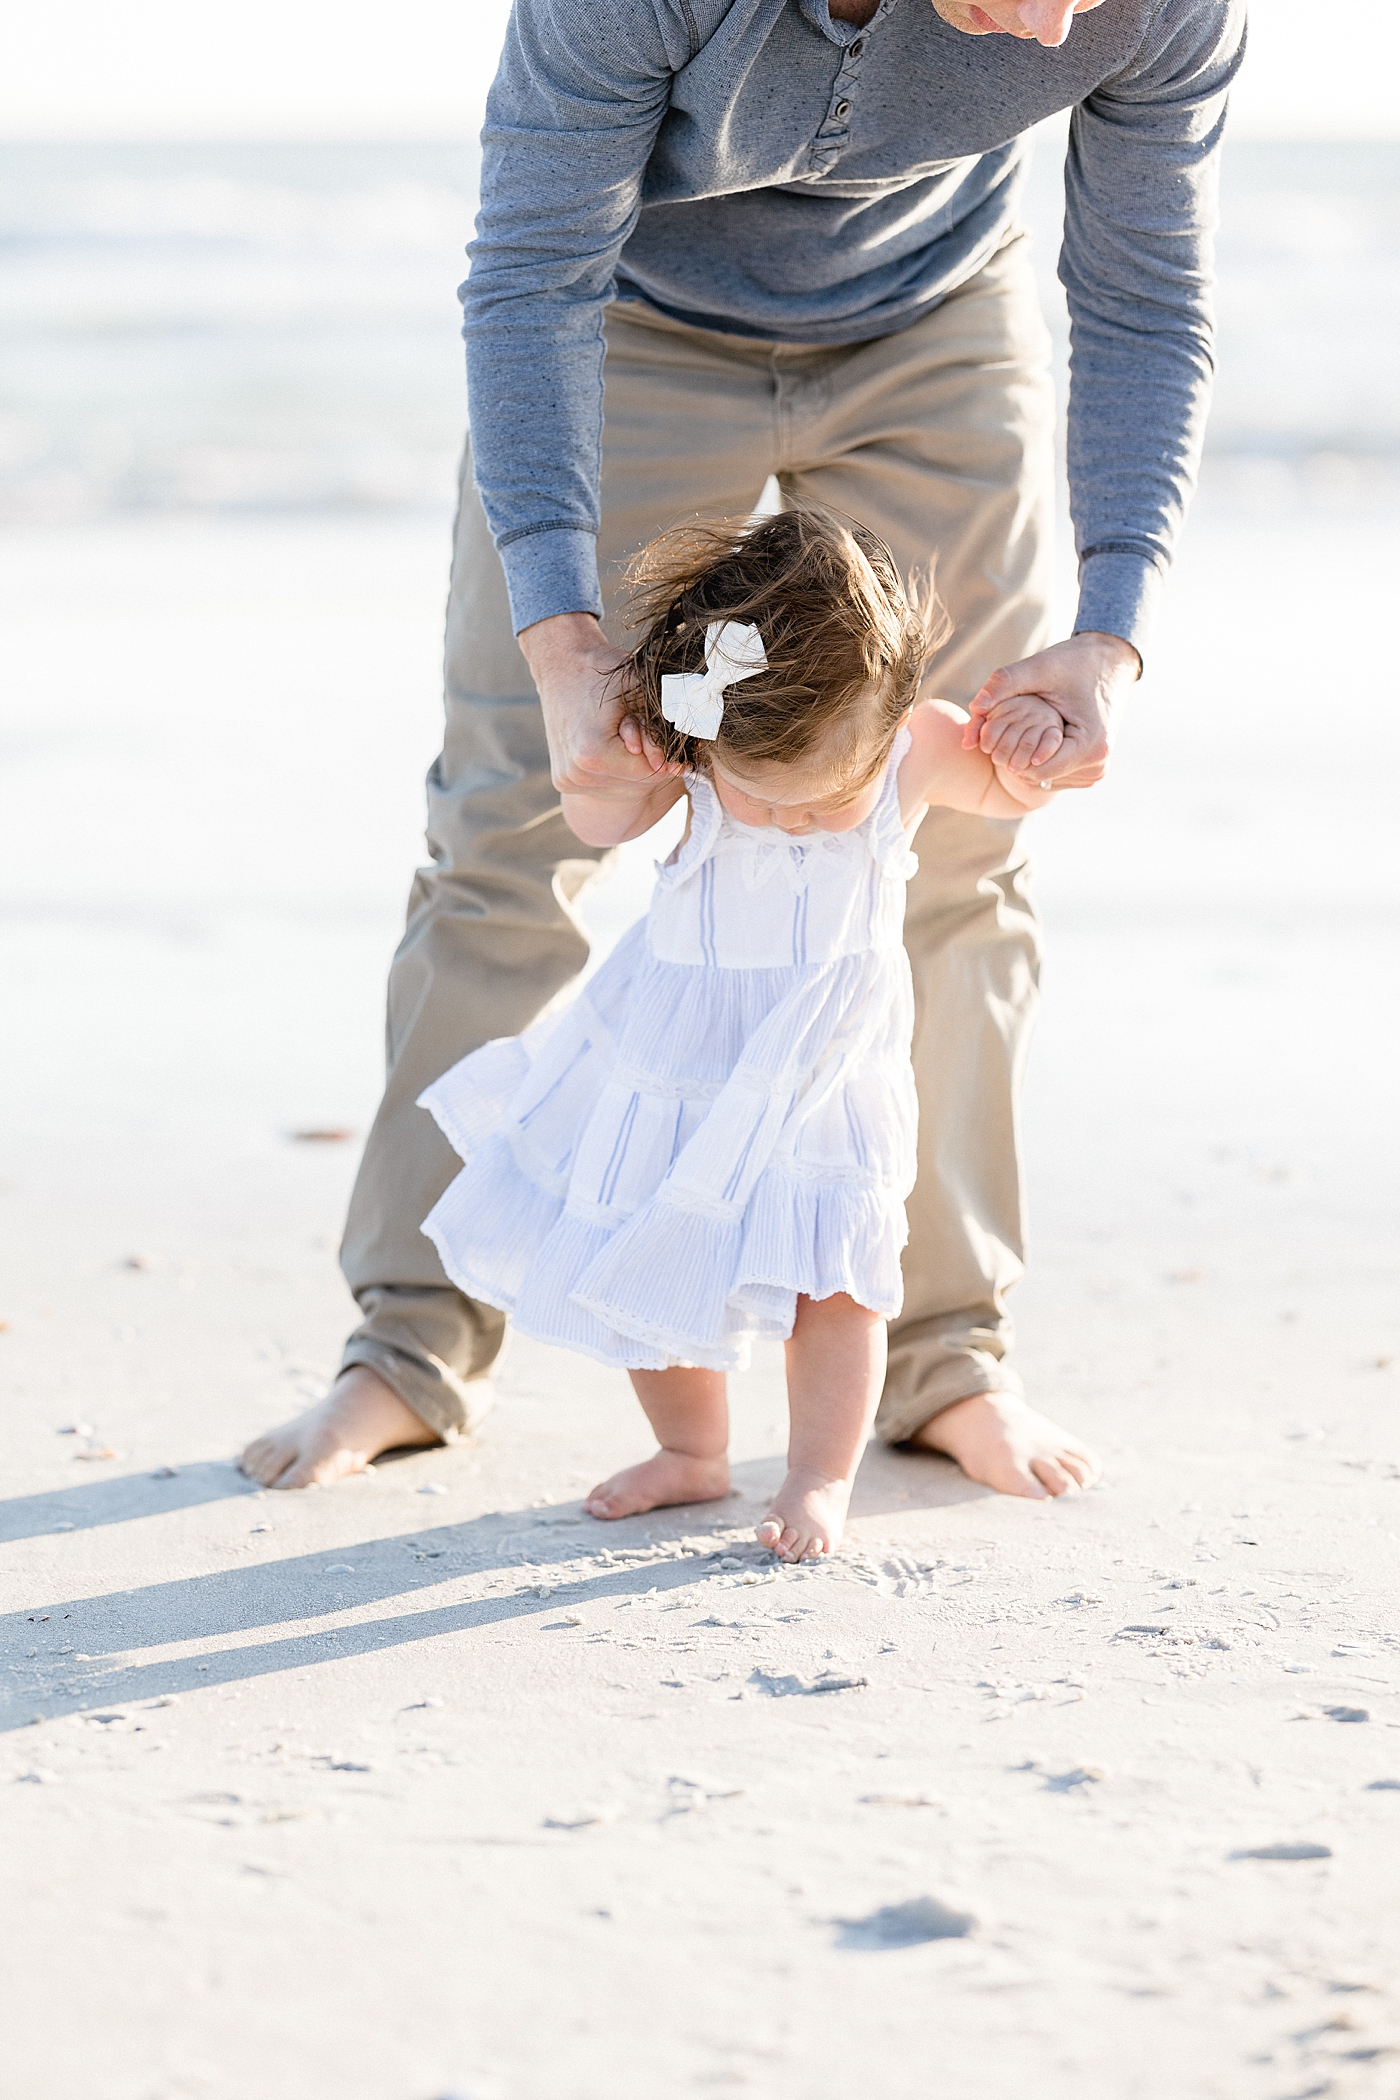 Dad walking with his baby girl on the beach. Photo by Brittany Elise Photography.